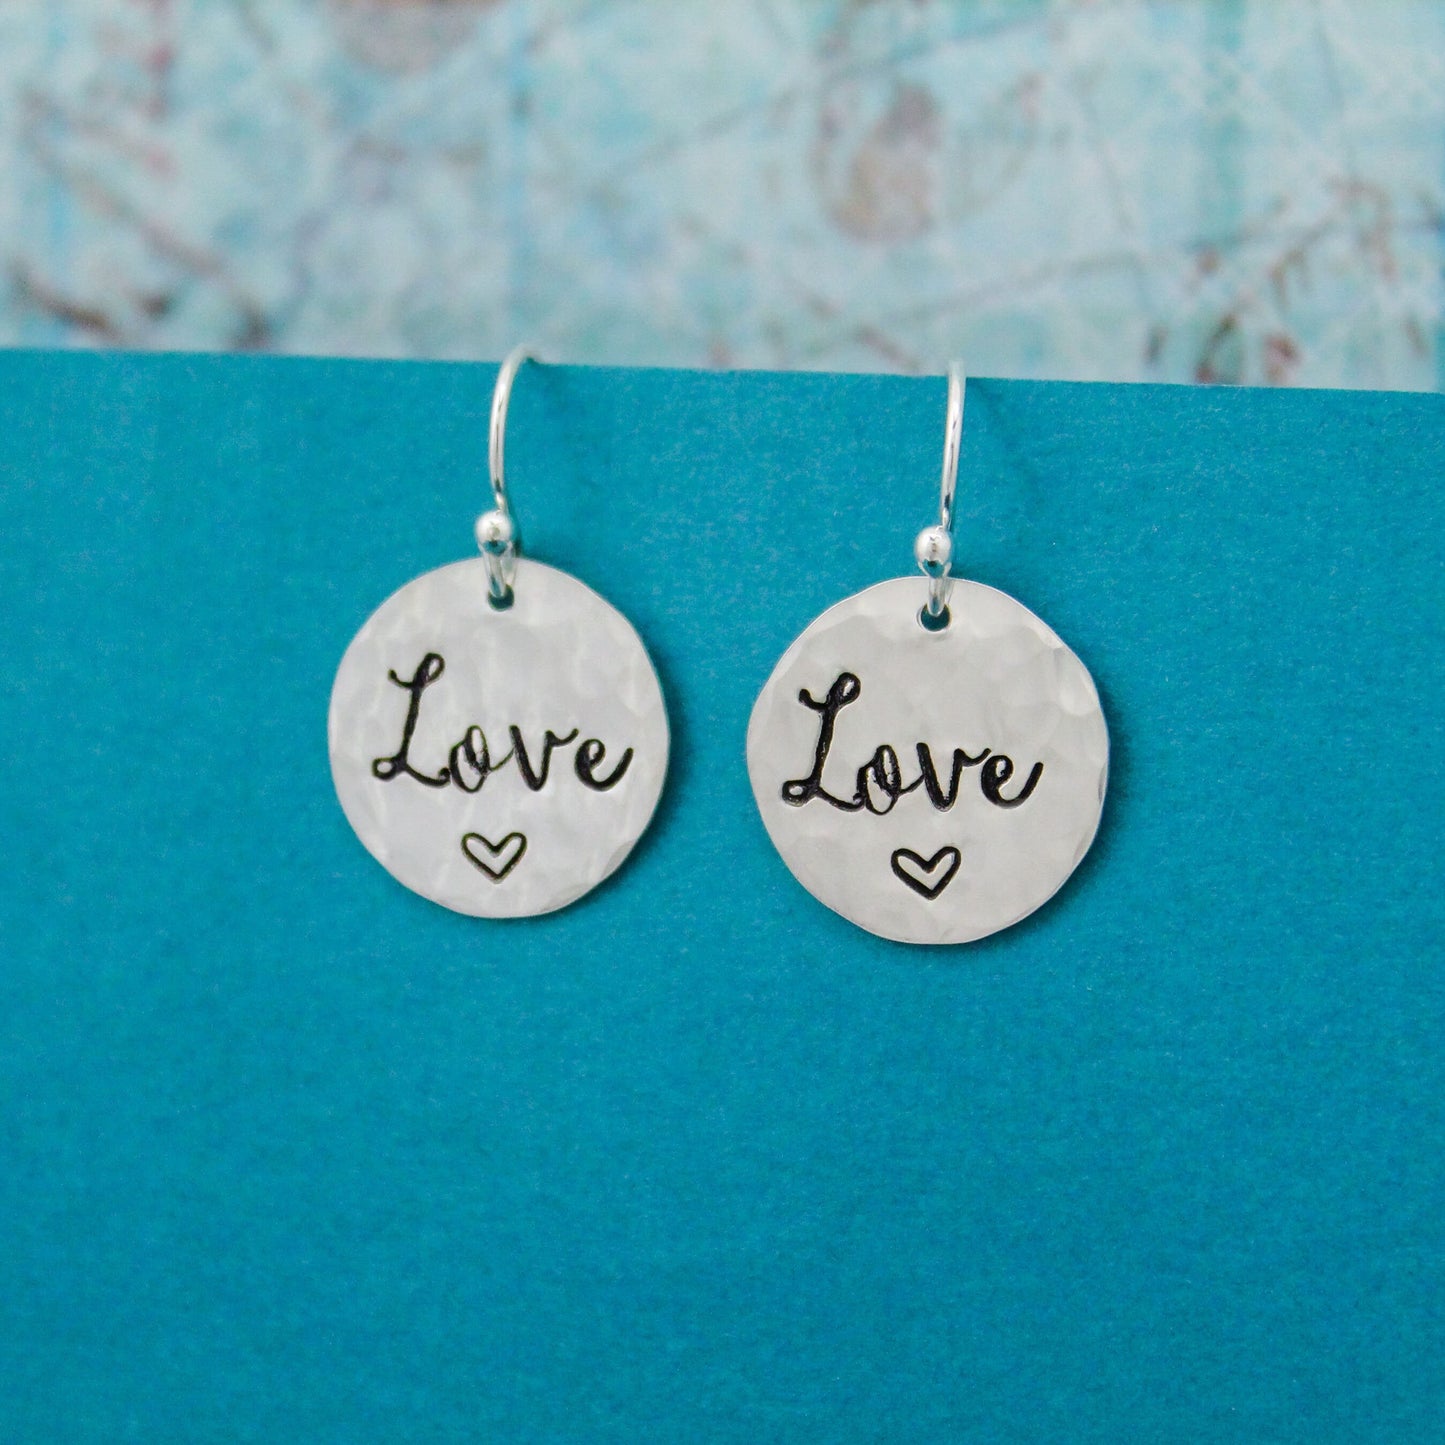 LOVE Earrings in Sterling Silver, Motivational Inspirational Jewelry, Gifts for Her, LOVE Jewelry, LOVE Jewelry Gift, Valentine's Day Gift